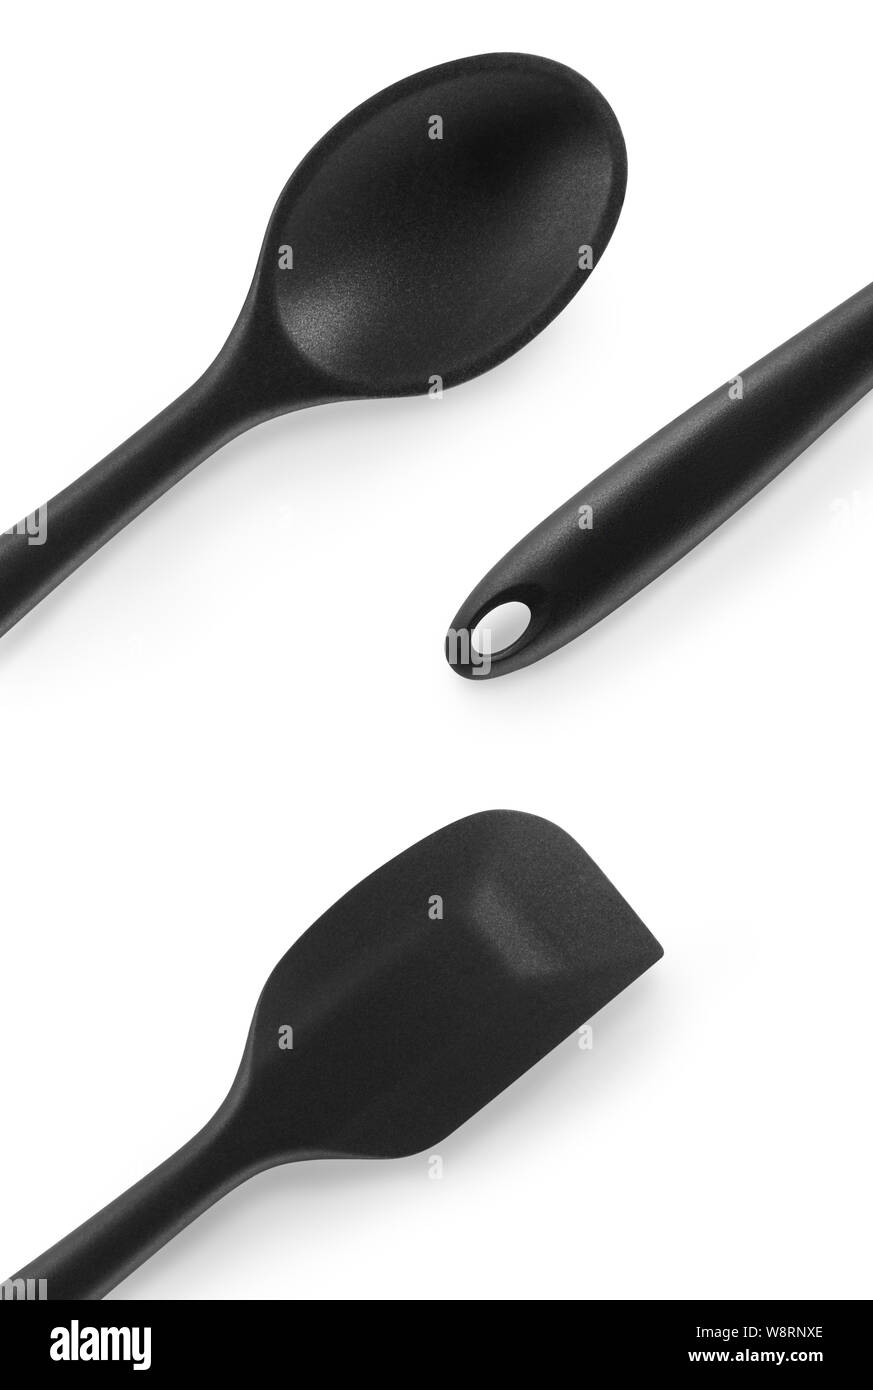 https://c8.alamy.com/comp/W8RNXE/collection-of-black-plastic-and-silicone-kitchen-spatula-and-spoon-isolated-on-white-background-W8RNXE.jpg